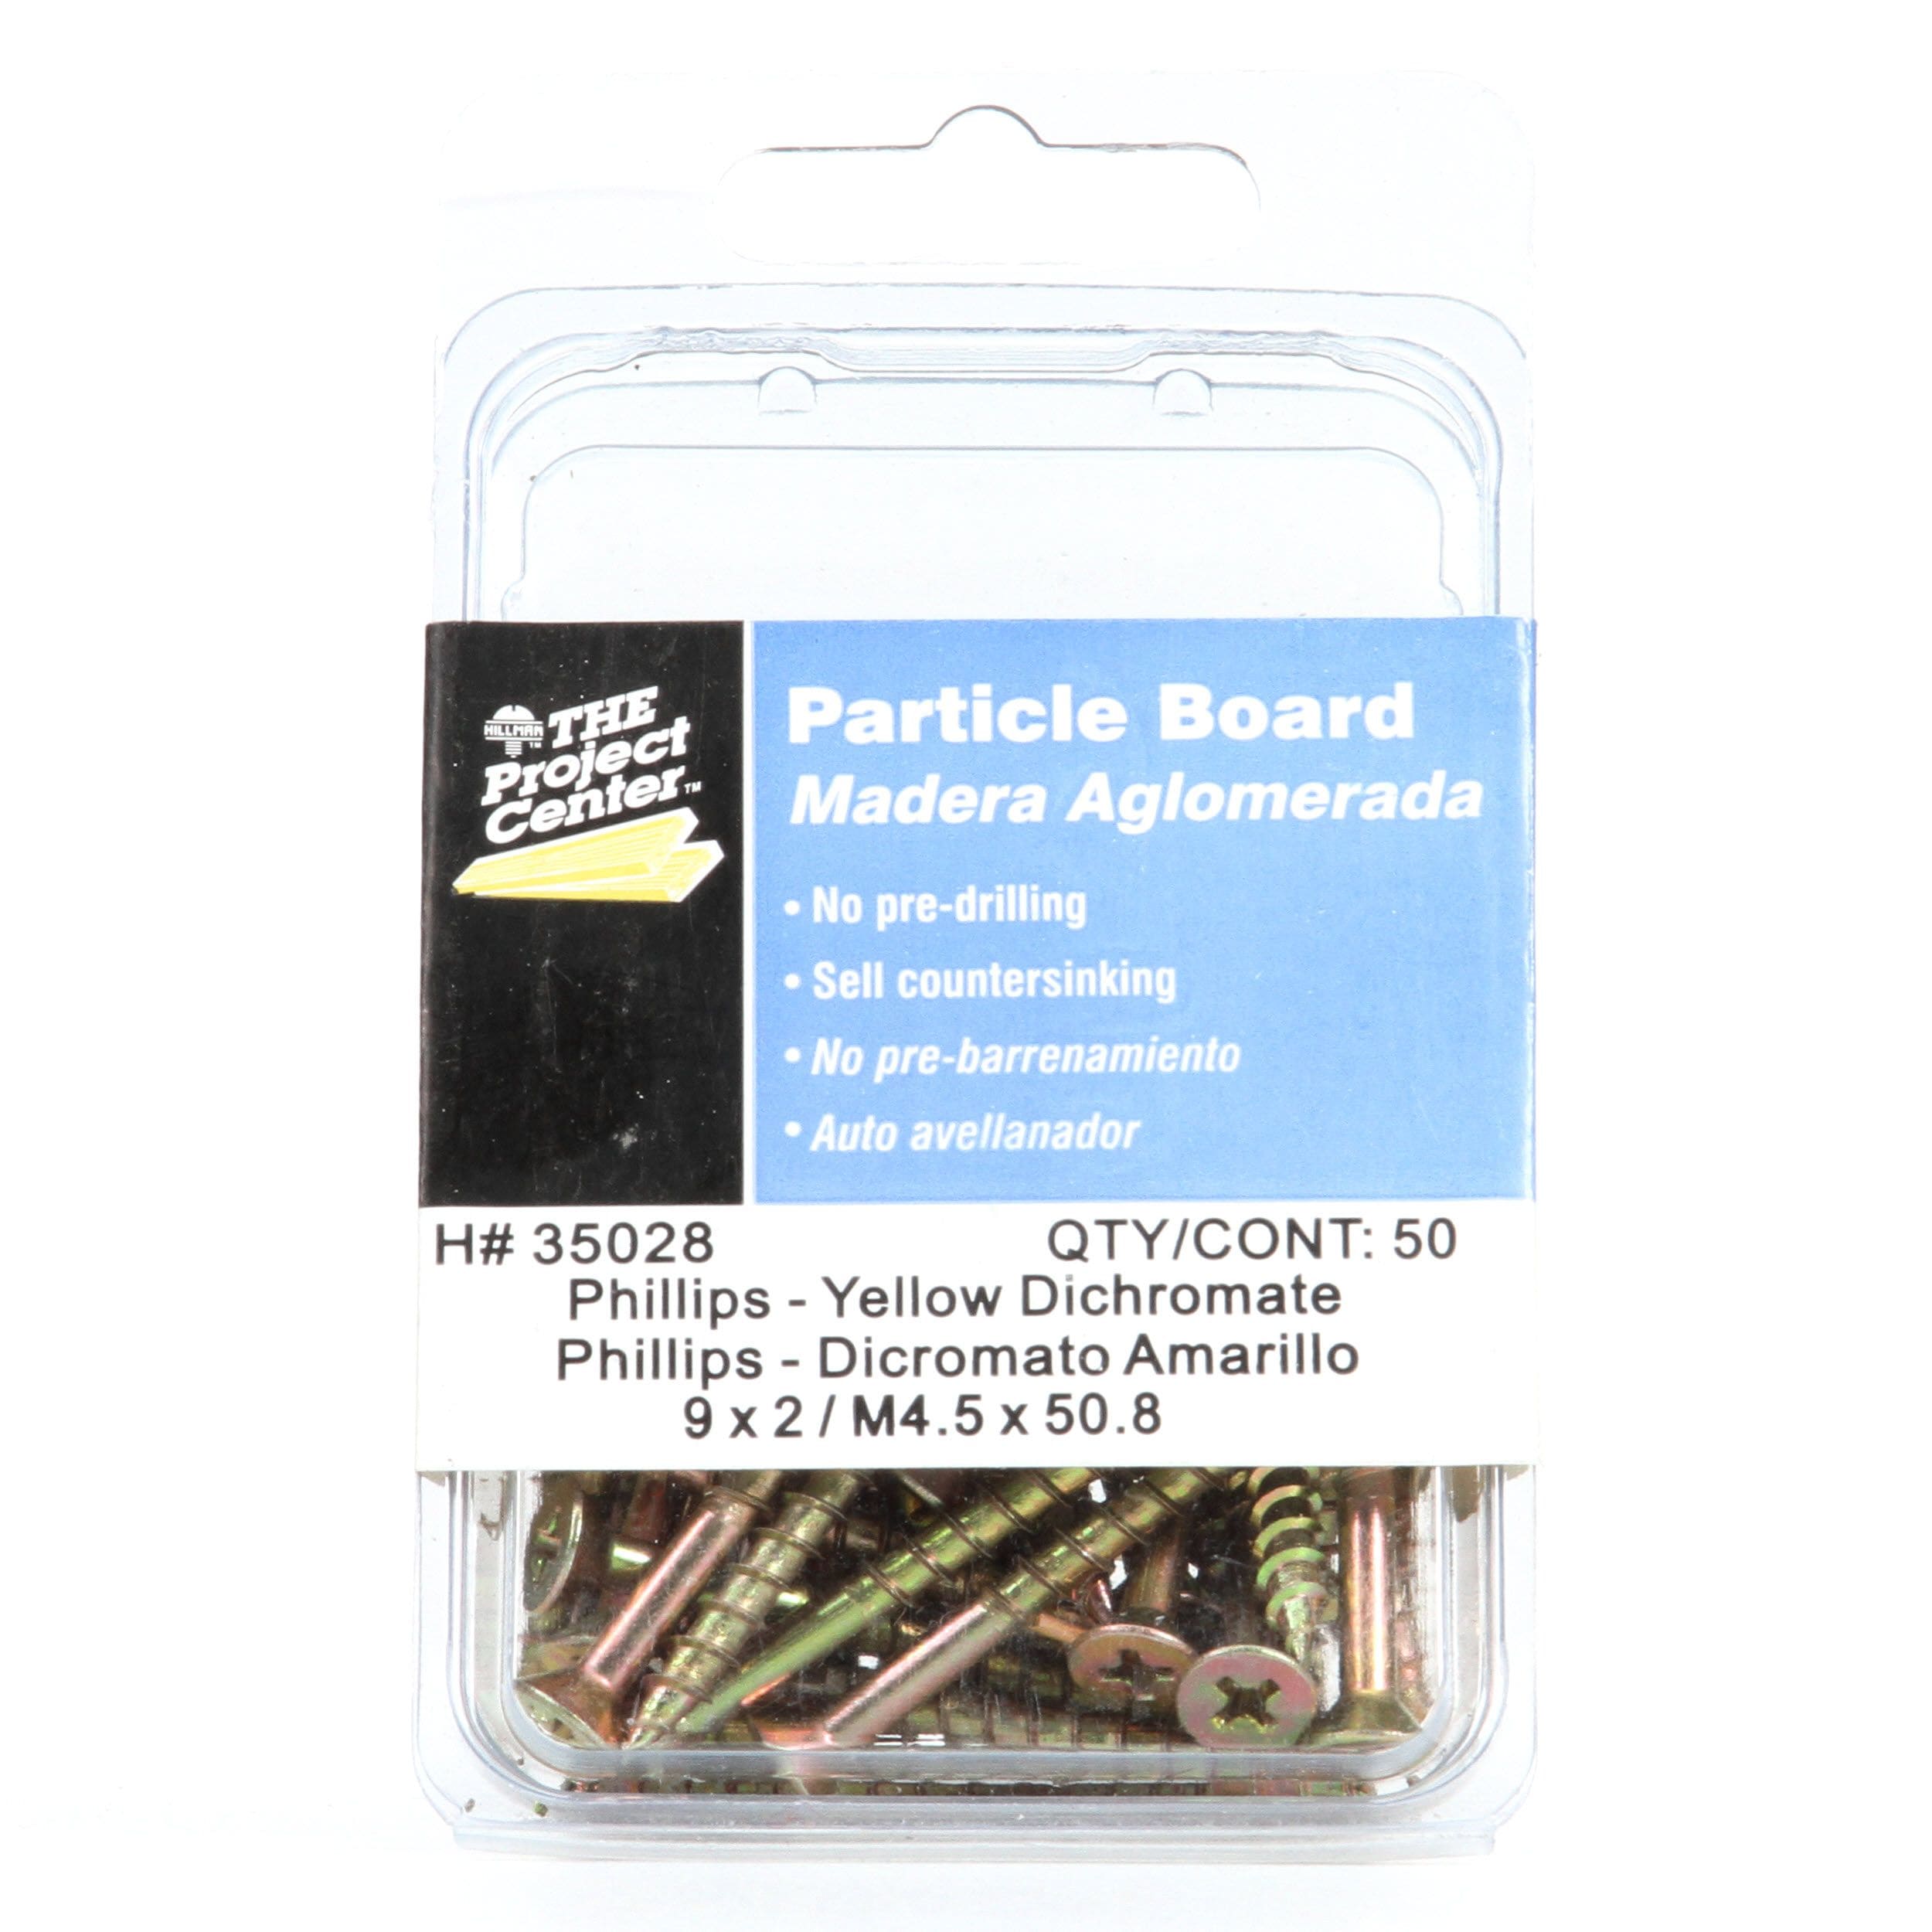 Reinforcing particle board stand | REEF2REEF Saltwater and Reef Aquarium  Forum